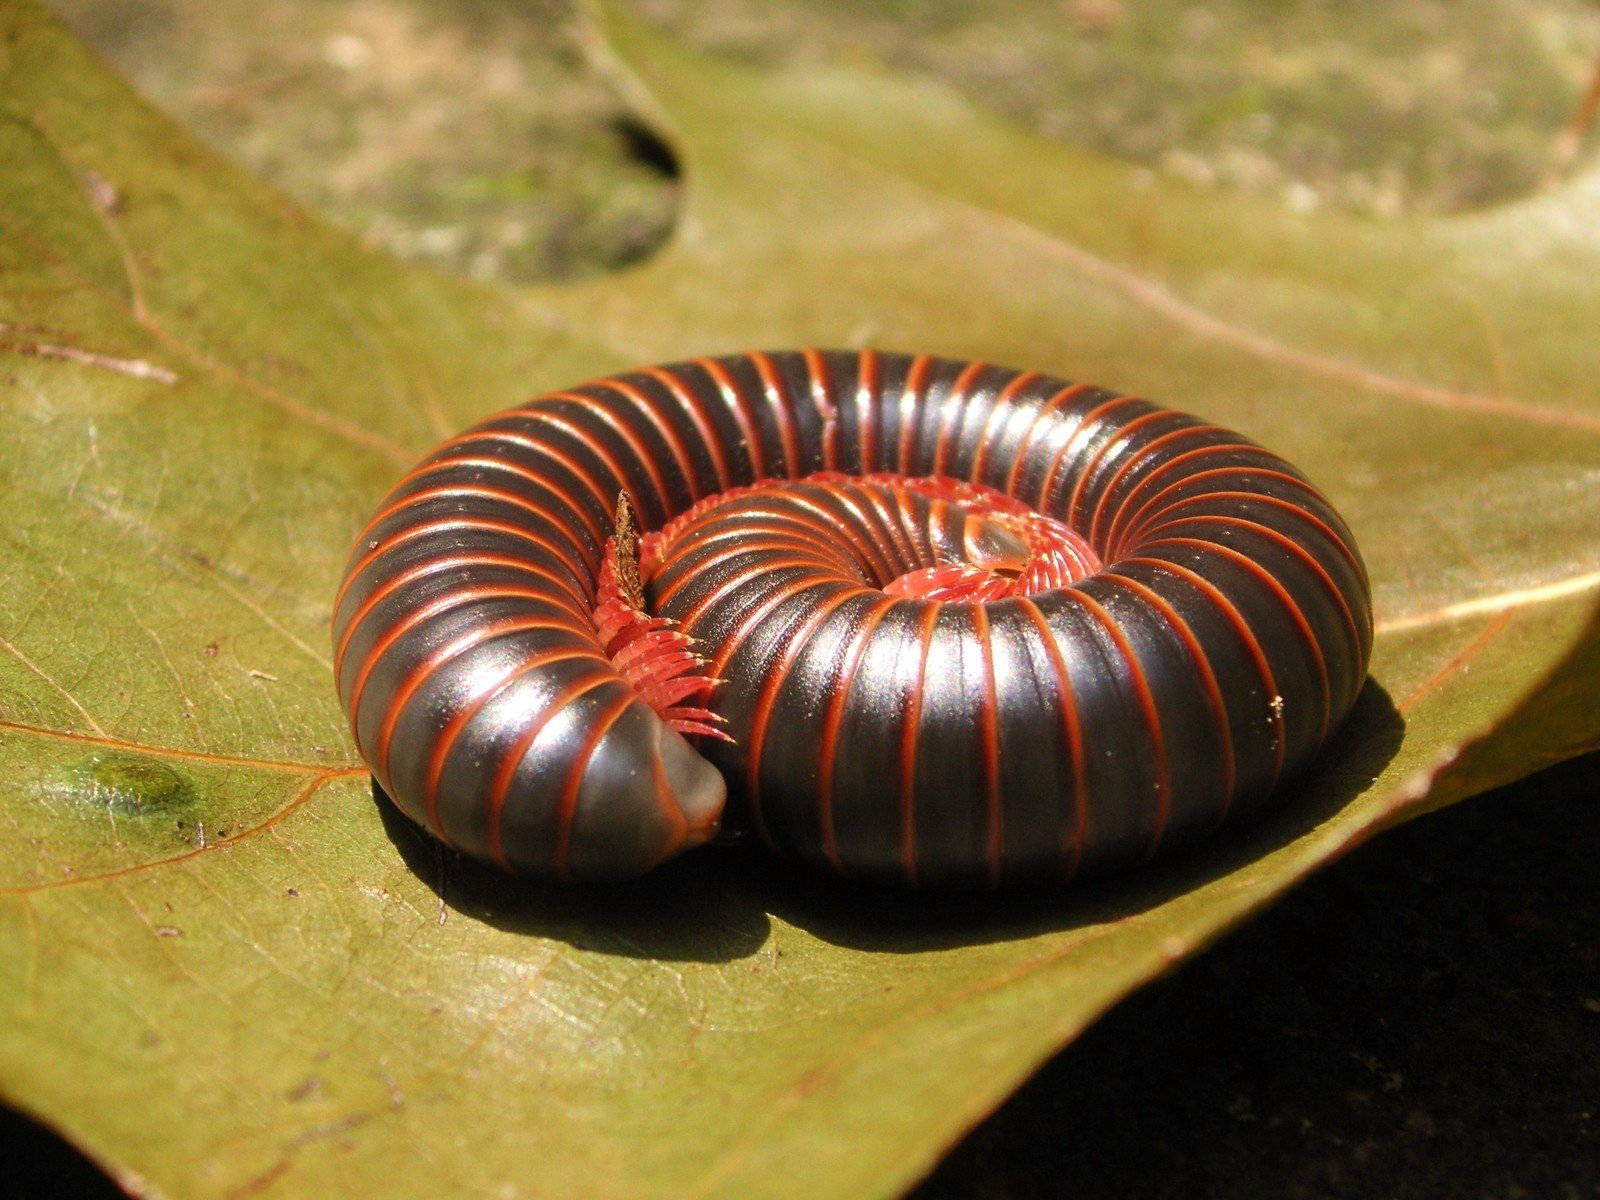 American Giant Millipede Curled Up On A Leaf Wallpaper